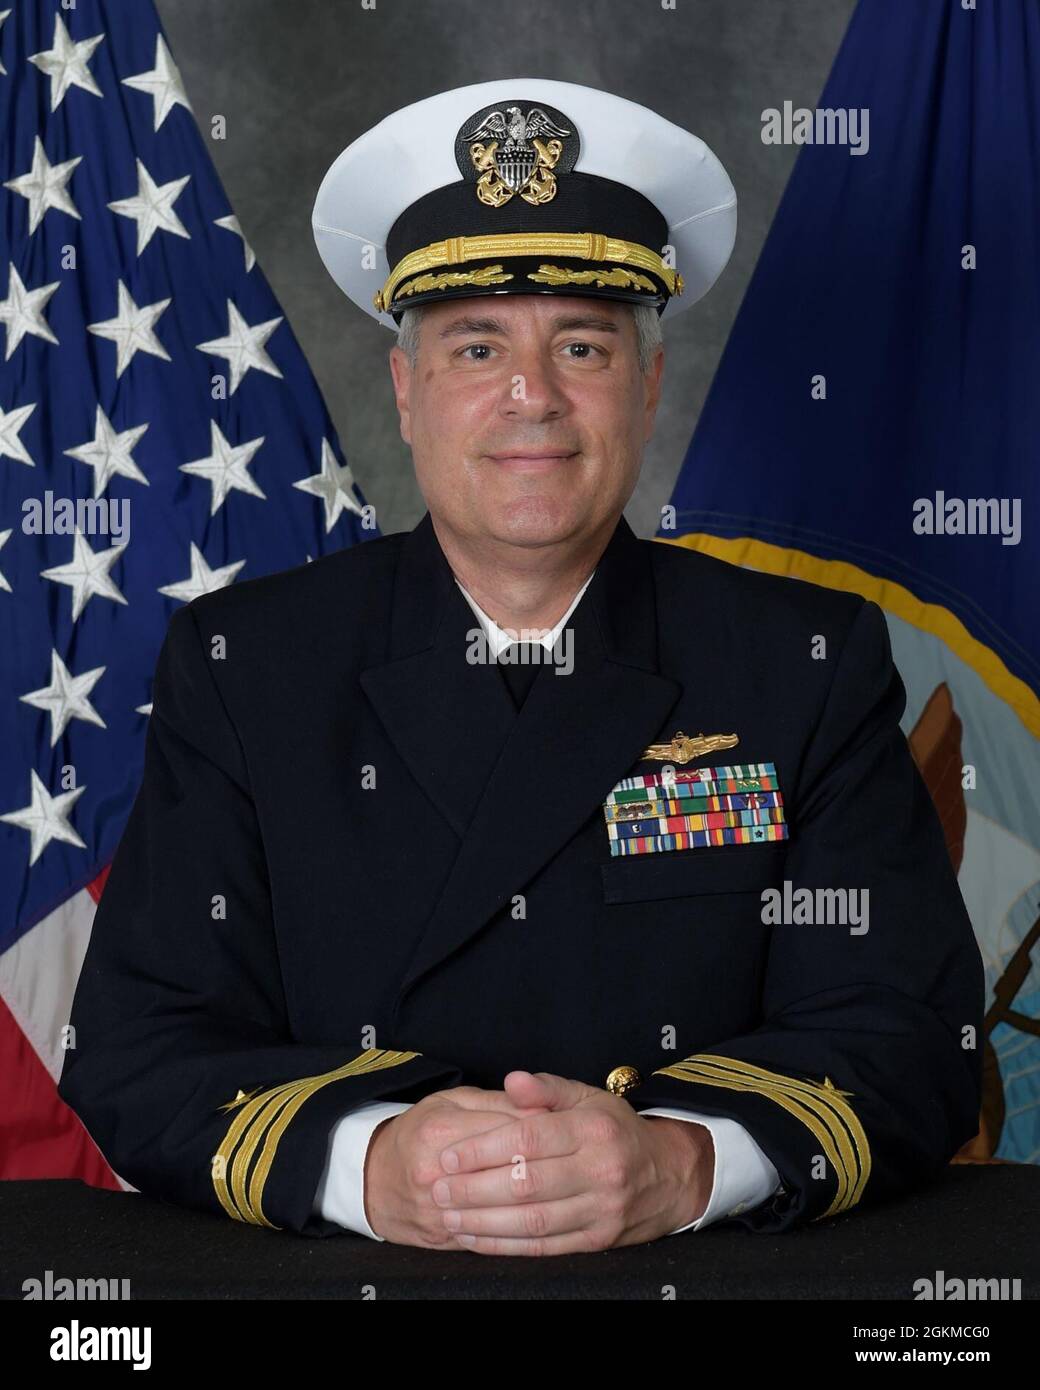 210525-N-XX139-0017 PENSACOLA, Fla. (May 25, 2021) Official portrait of Cmdr. Michael Tiefel, executive officer of the Center for Information Warfare Training. With four schoolhouse commands, a detachment, and training sites throughout the United States and Japan, CIWT trains approximately 26,000 students every year, delivering trained information warfare professionals to the Navy and joint services. CIWT also offers more than 200 courses for cryptologic technicians, intelligence specialists, information systems technicians, electronics technicians, and officers in the information warfare comm Stock Photo